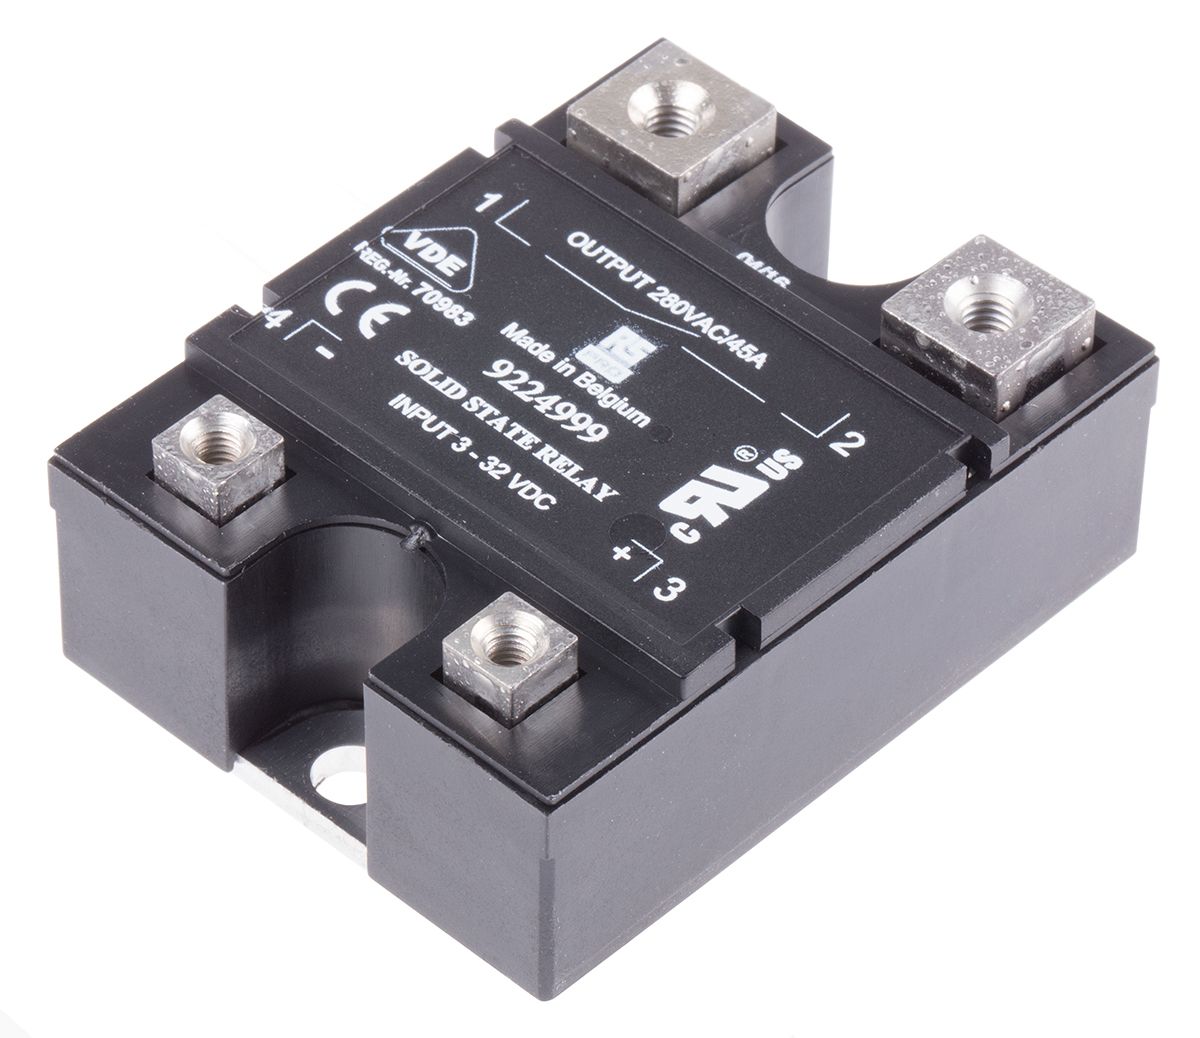 RS PRO Panel Mount Solid State Relay, 45 A rms Max. Load, 280 V ac Max. Load, 32 V dc Max. Control